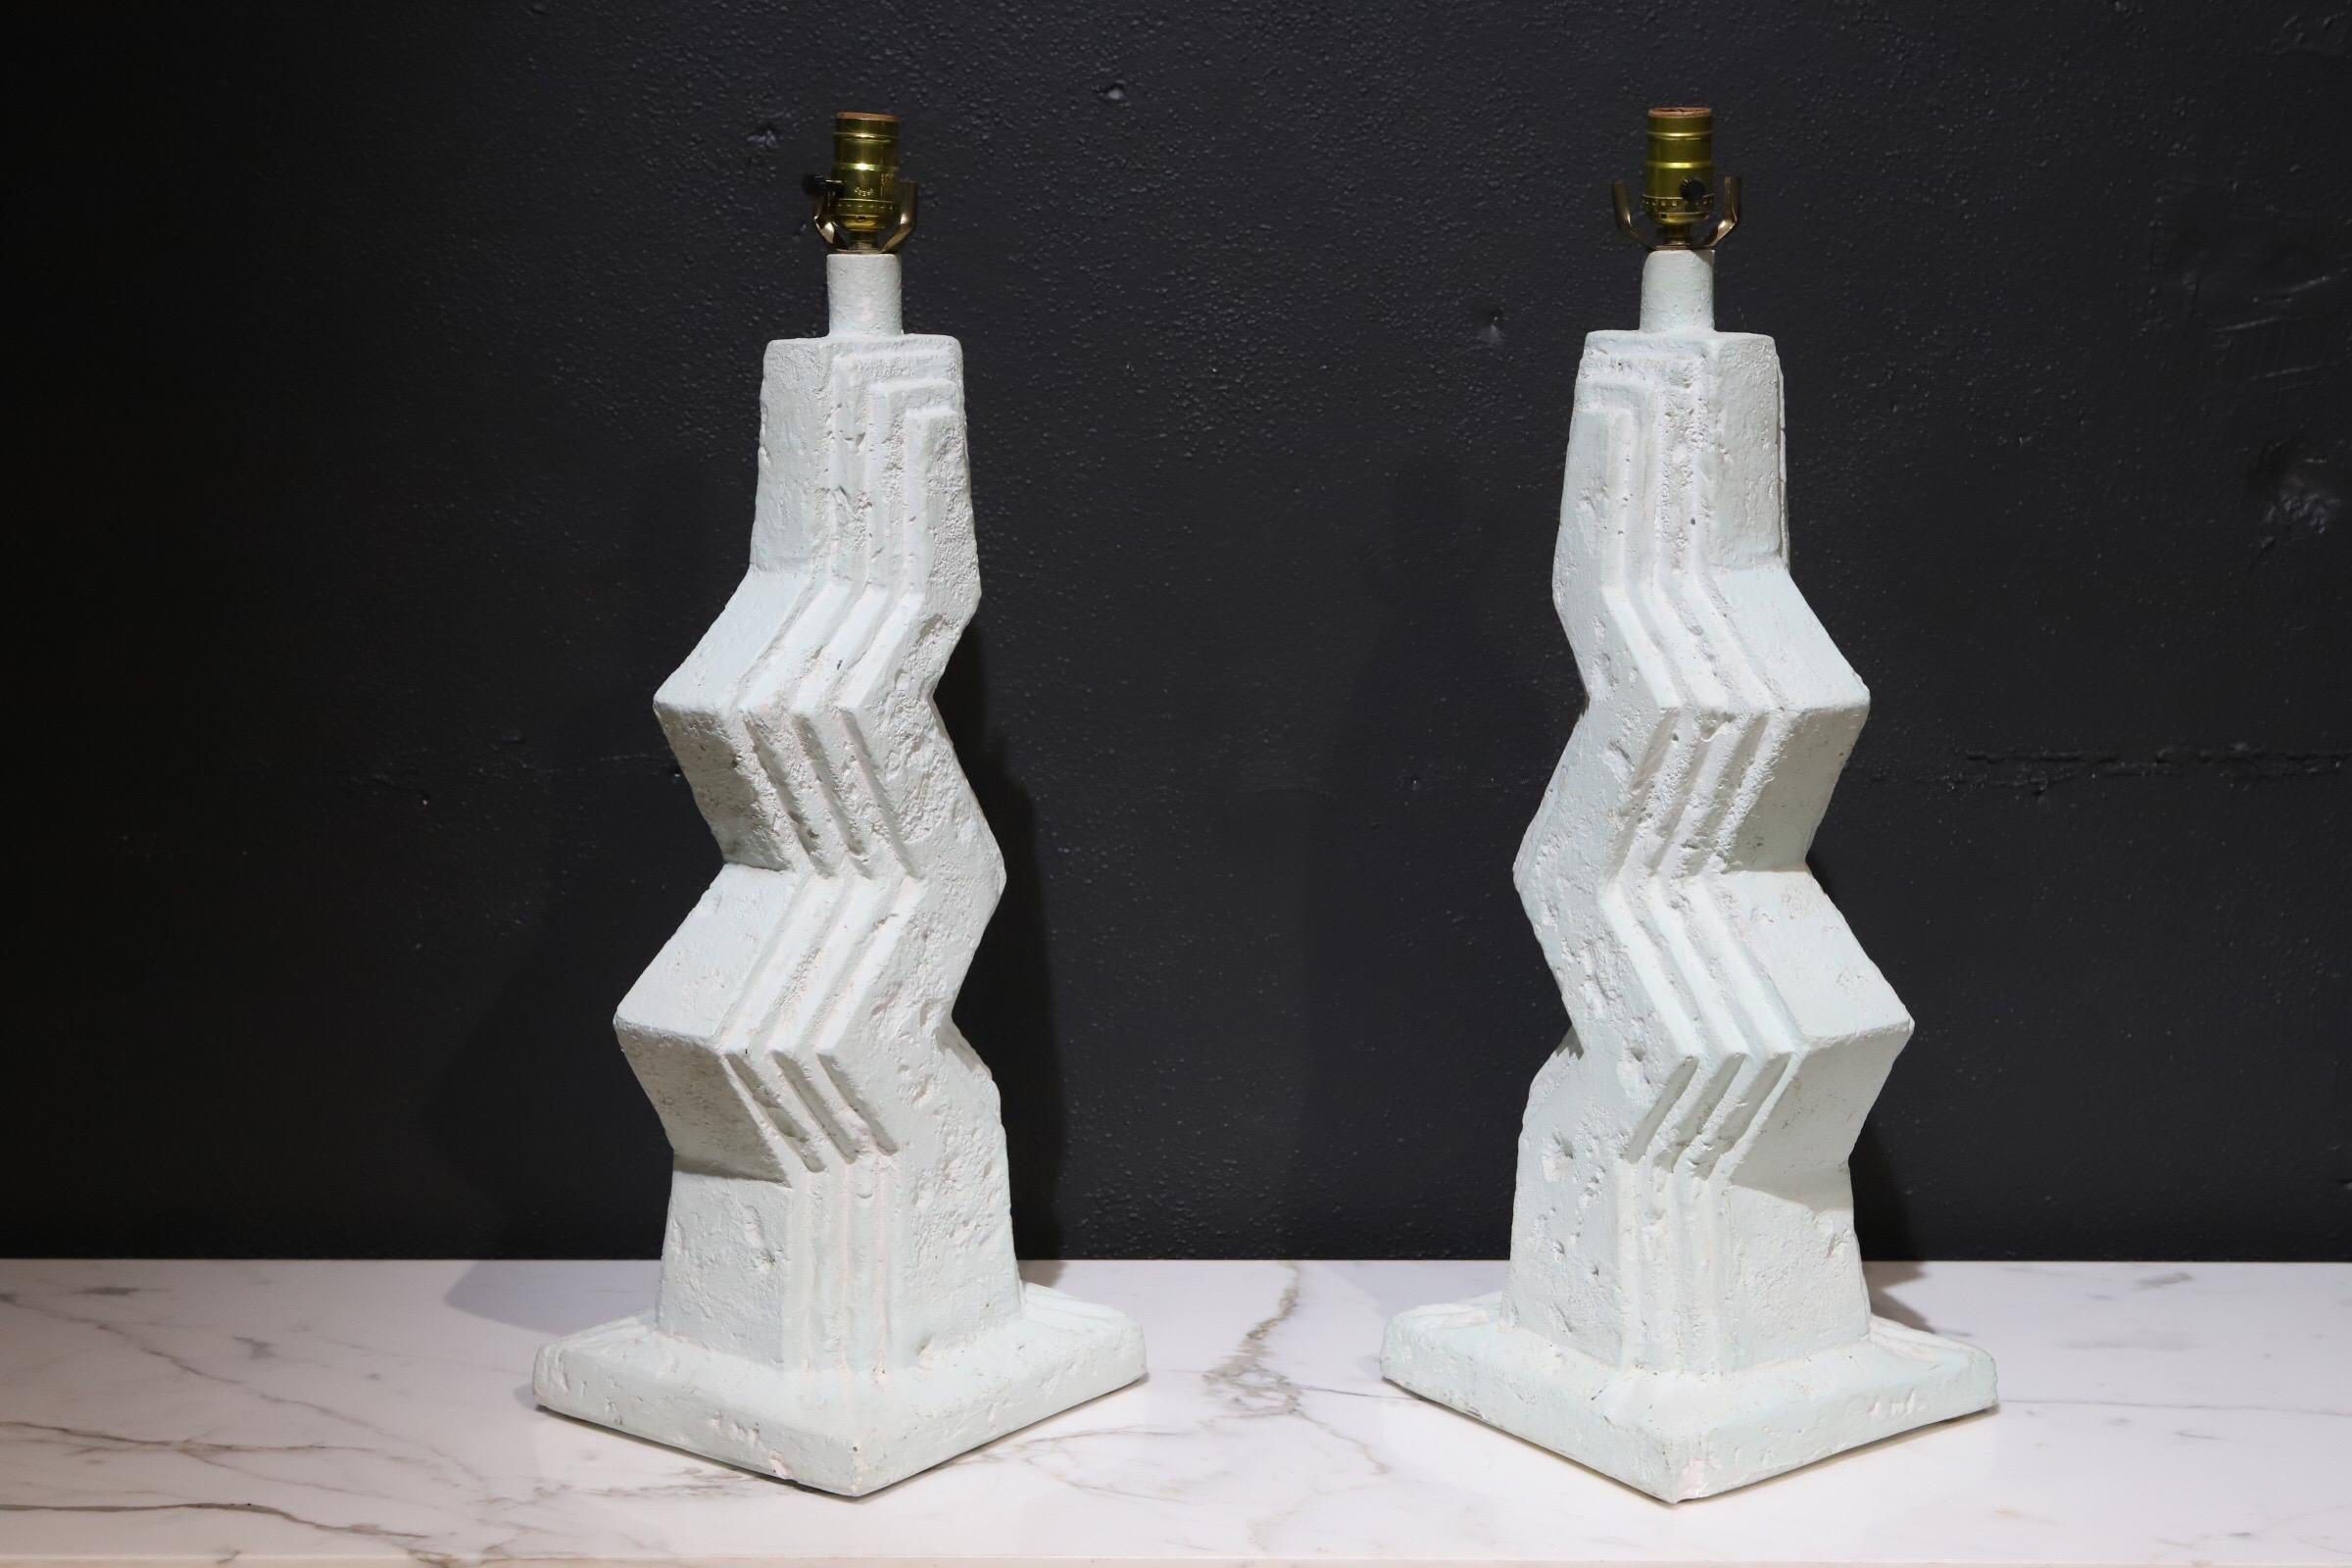 Stylish pair for artist made plaster lamps with zig zag shape. Lamps have a light greenish tint, hard to capture in photos. Pictured atop 74 inch Florence Knoll marble credenza for scale. Sold without shades.